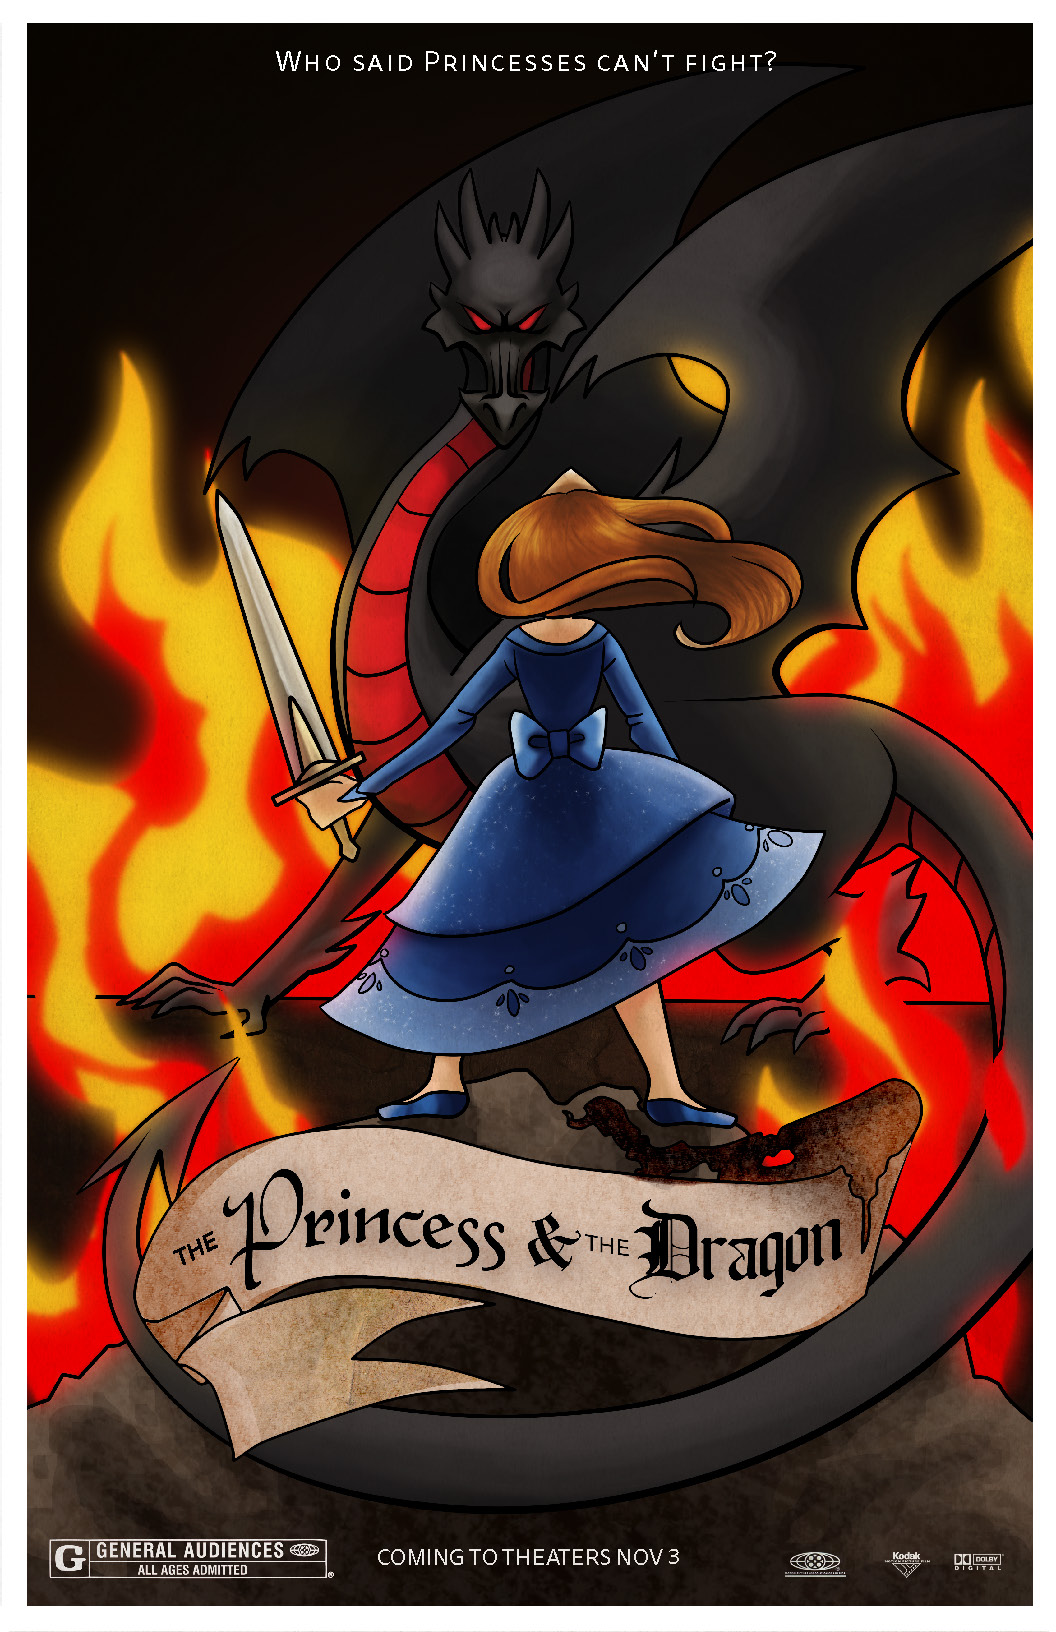 This is a poster design for the fake movie, 'The Princess and the Dragon.' It is cartoonish and animated in style, drawing on inspirations from classic disney films. There are two figures: a black and intimidating dragon in the back whose tail wraps around to the front of the poster, and a princess dressed in a sparkling blue dress who heroically faces the dragon. The dragon is facing the viewer and the princess, while the princess is facing the dragon and away from the viewer. There is fire surrounding them, illuminating the two figures but nothing else. The background is black.  At the top is a tagline in white that says, 'Who said princesses can't fight?' At the bottom is the graphic for the movie title. It is a old-fashioned scroll that says 'The Princess and the Dragon' in blackletter type. The scroll is burnt at the same end that 'the Dragon' is on. Below that is the rating, release date, and movie sponsors.